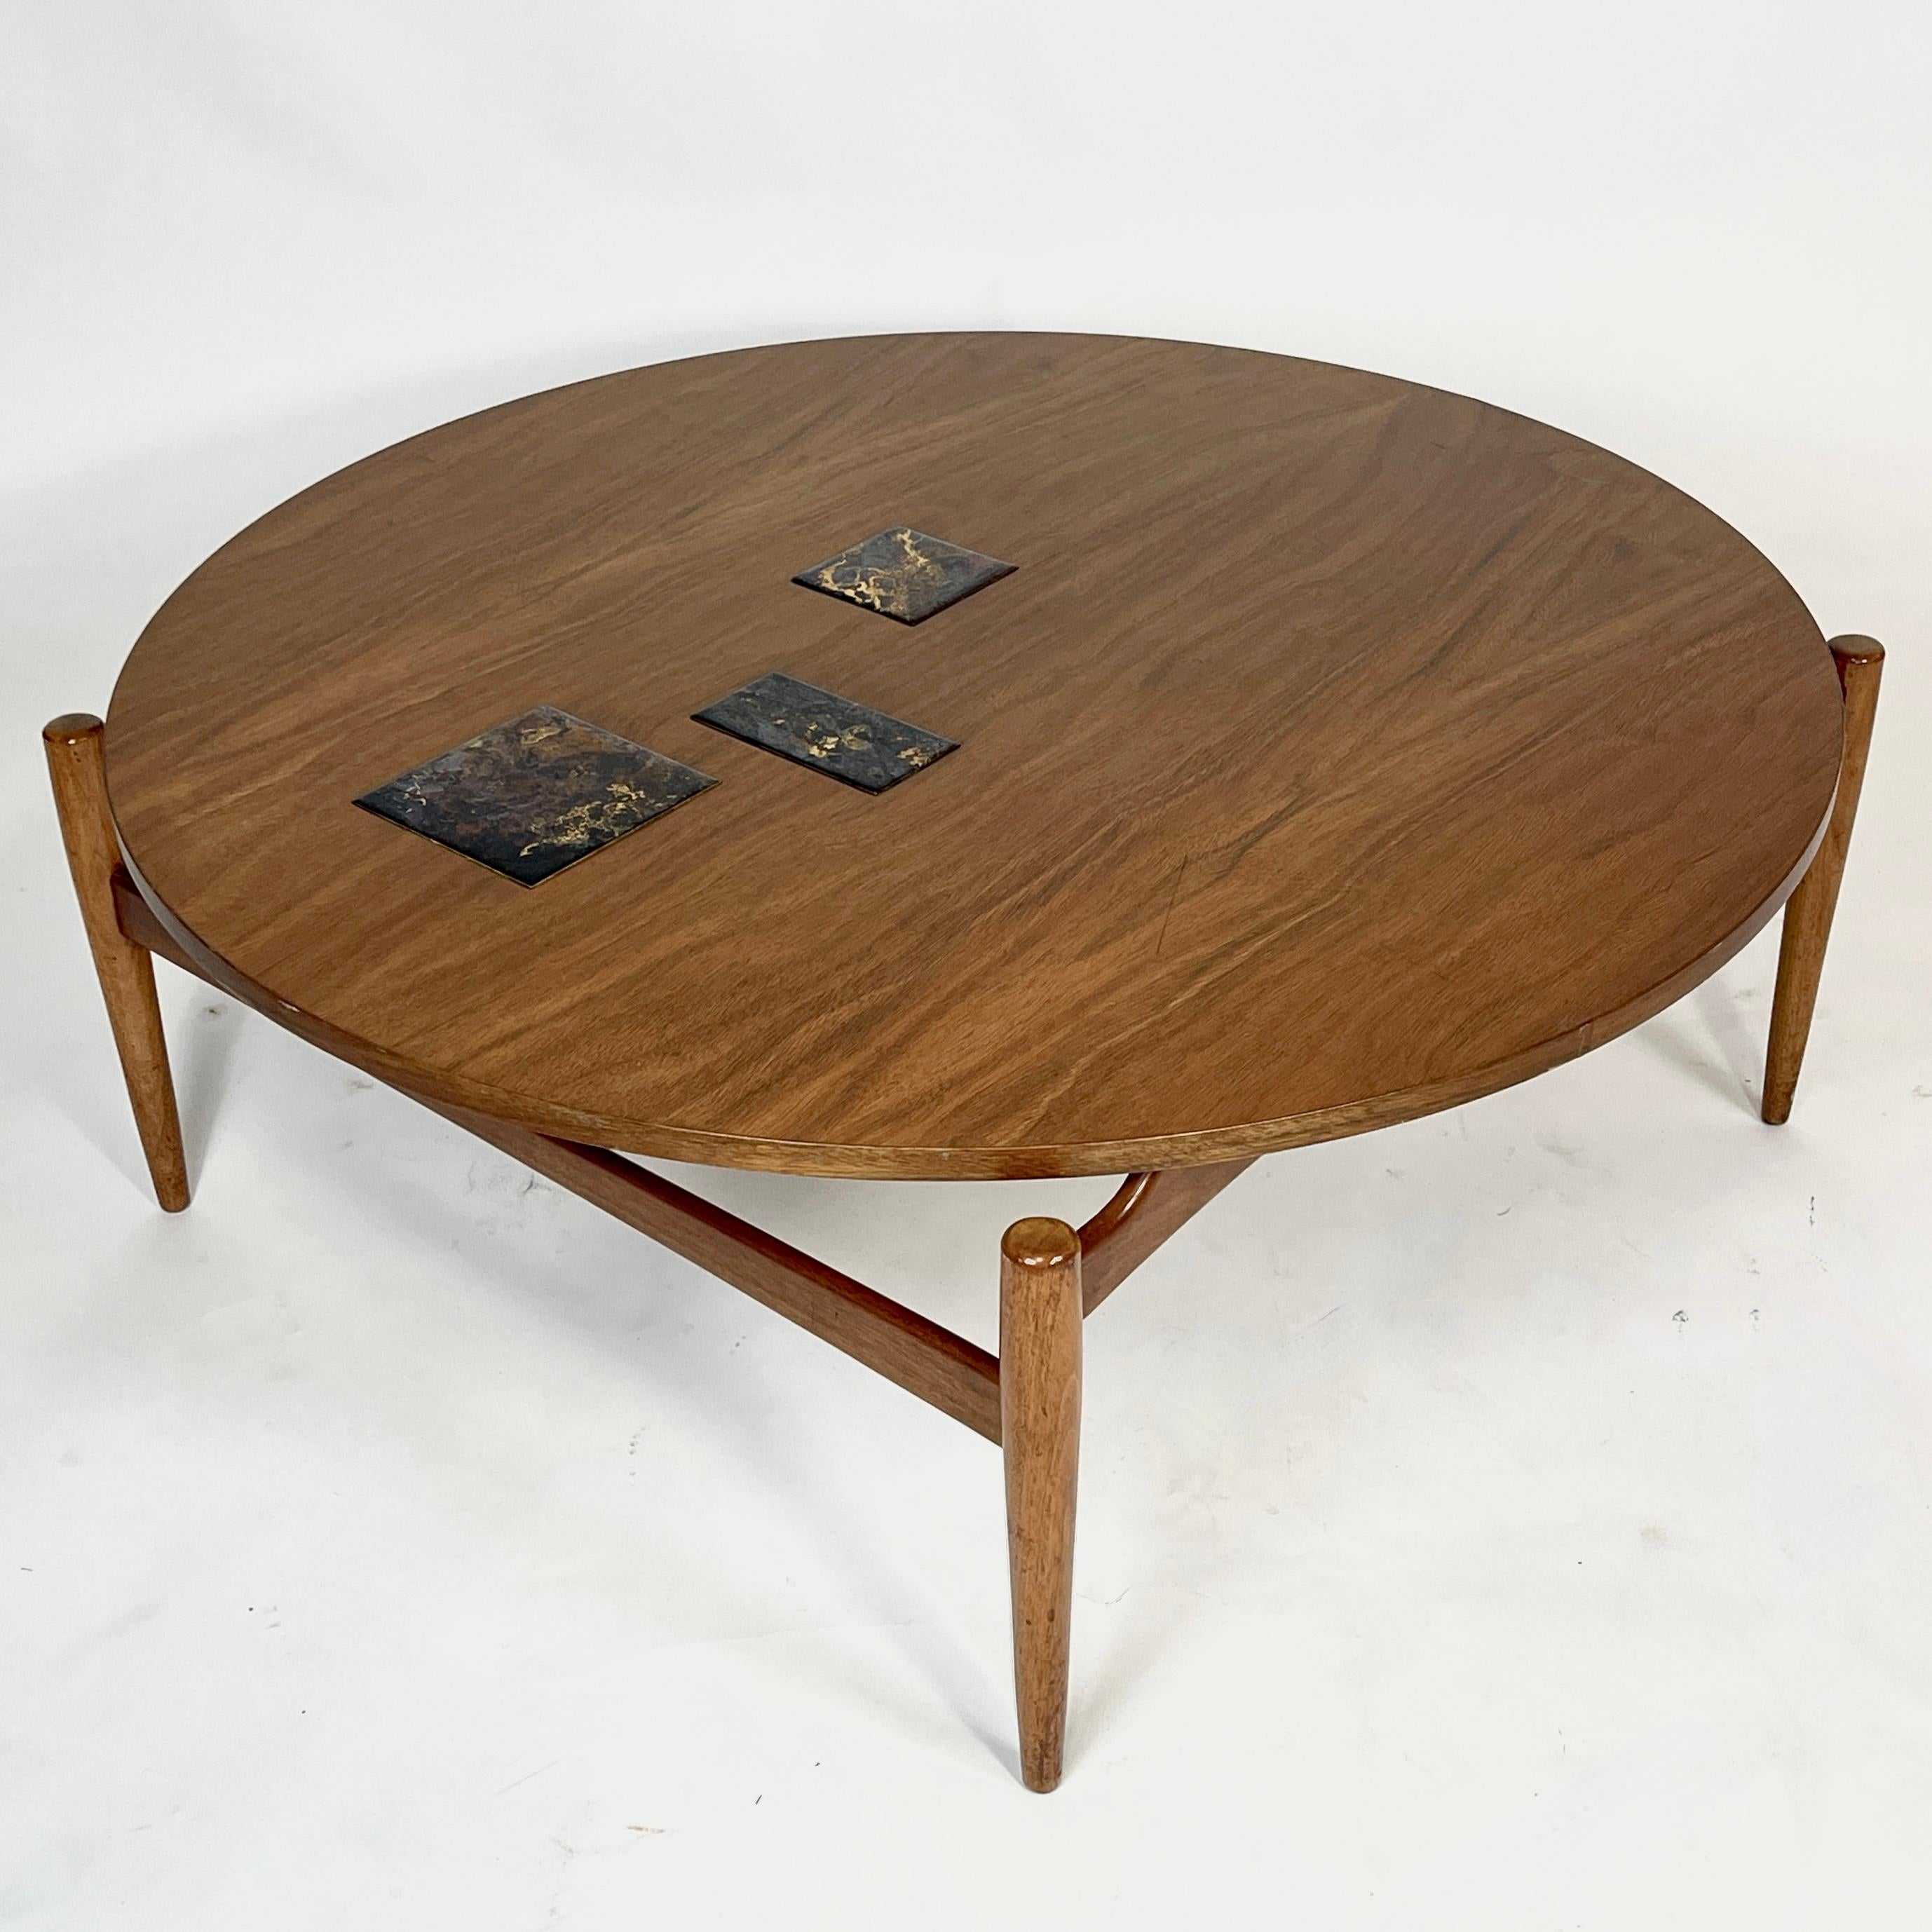 Ceramic Jens Risom Floating Walnut and Tile Coffee Table For Sale